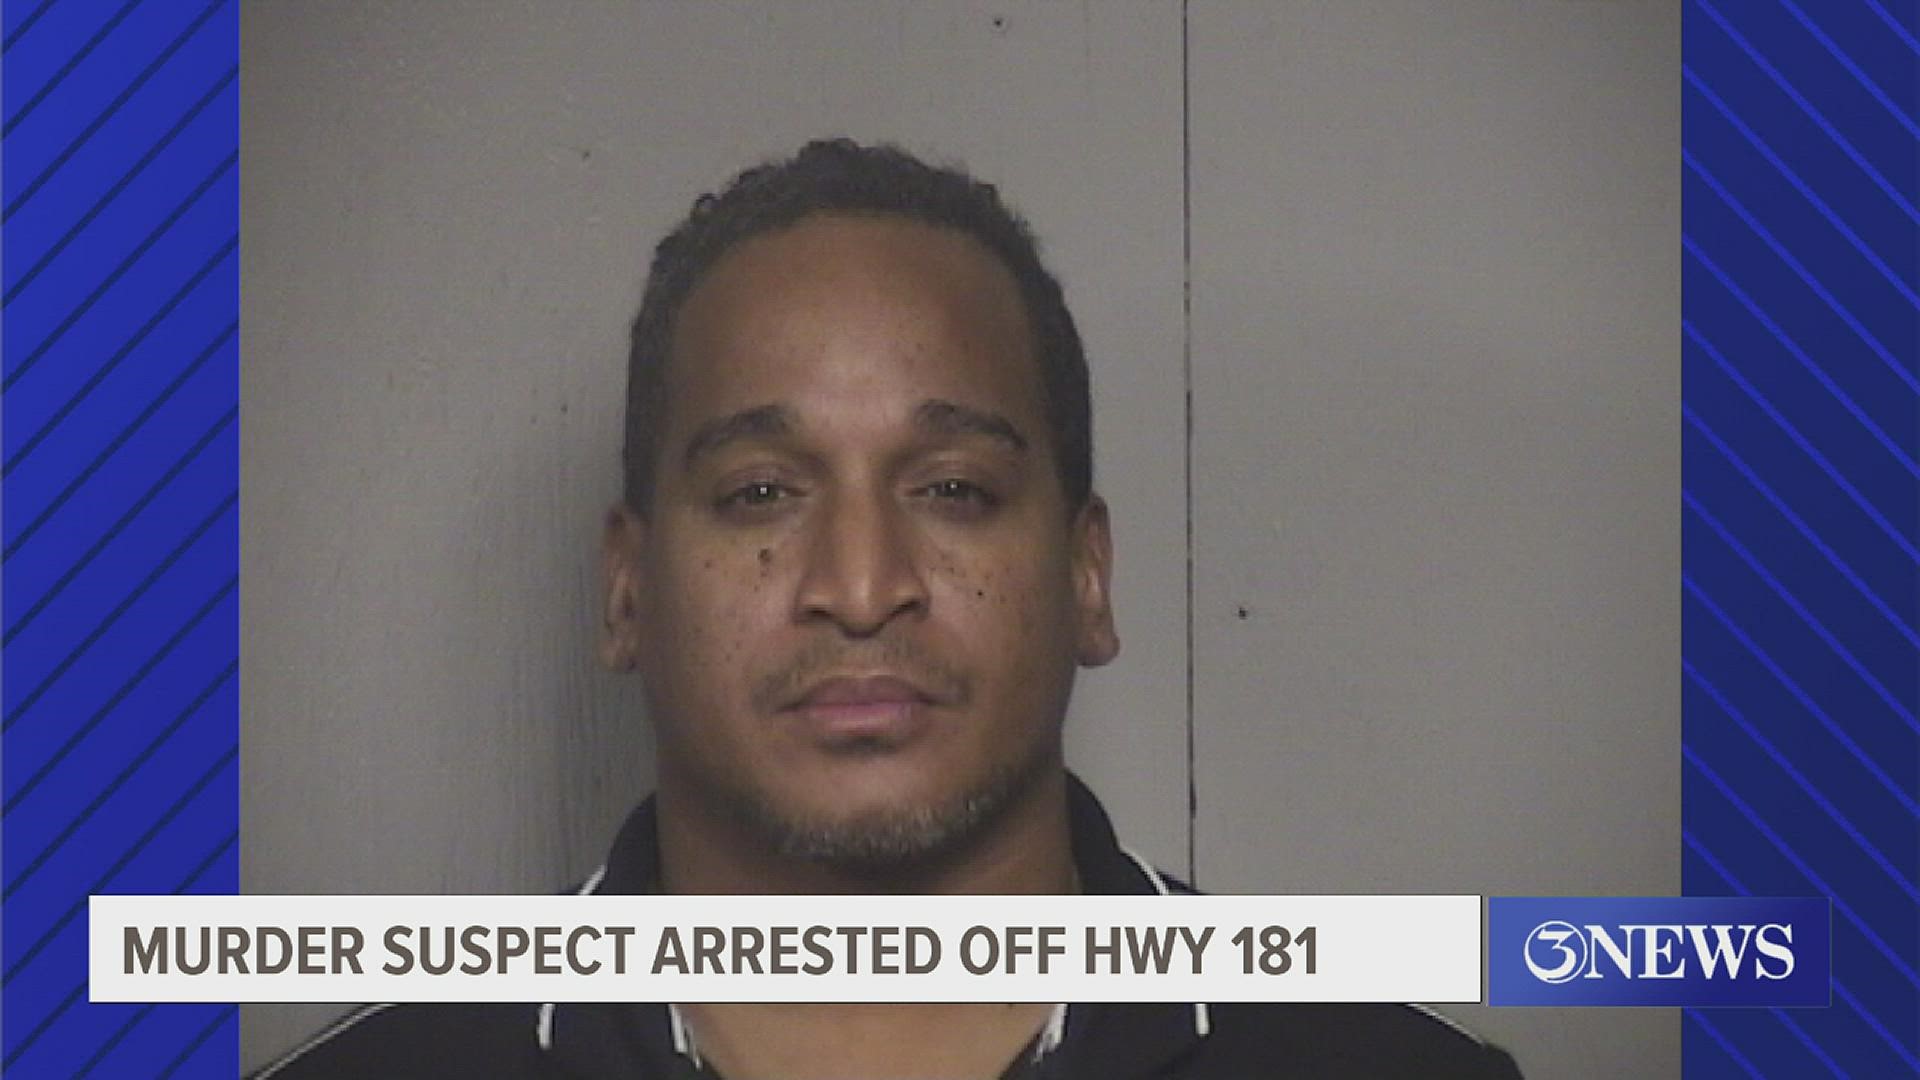 42-year-old Phillip Cheatham was arrested Friday on the 4500 block of E Causeway, near U.S. Highway 181 access road. He is being held on a $750,000 bond.